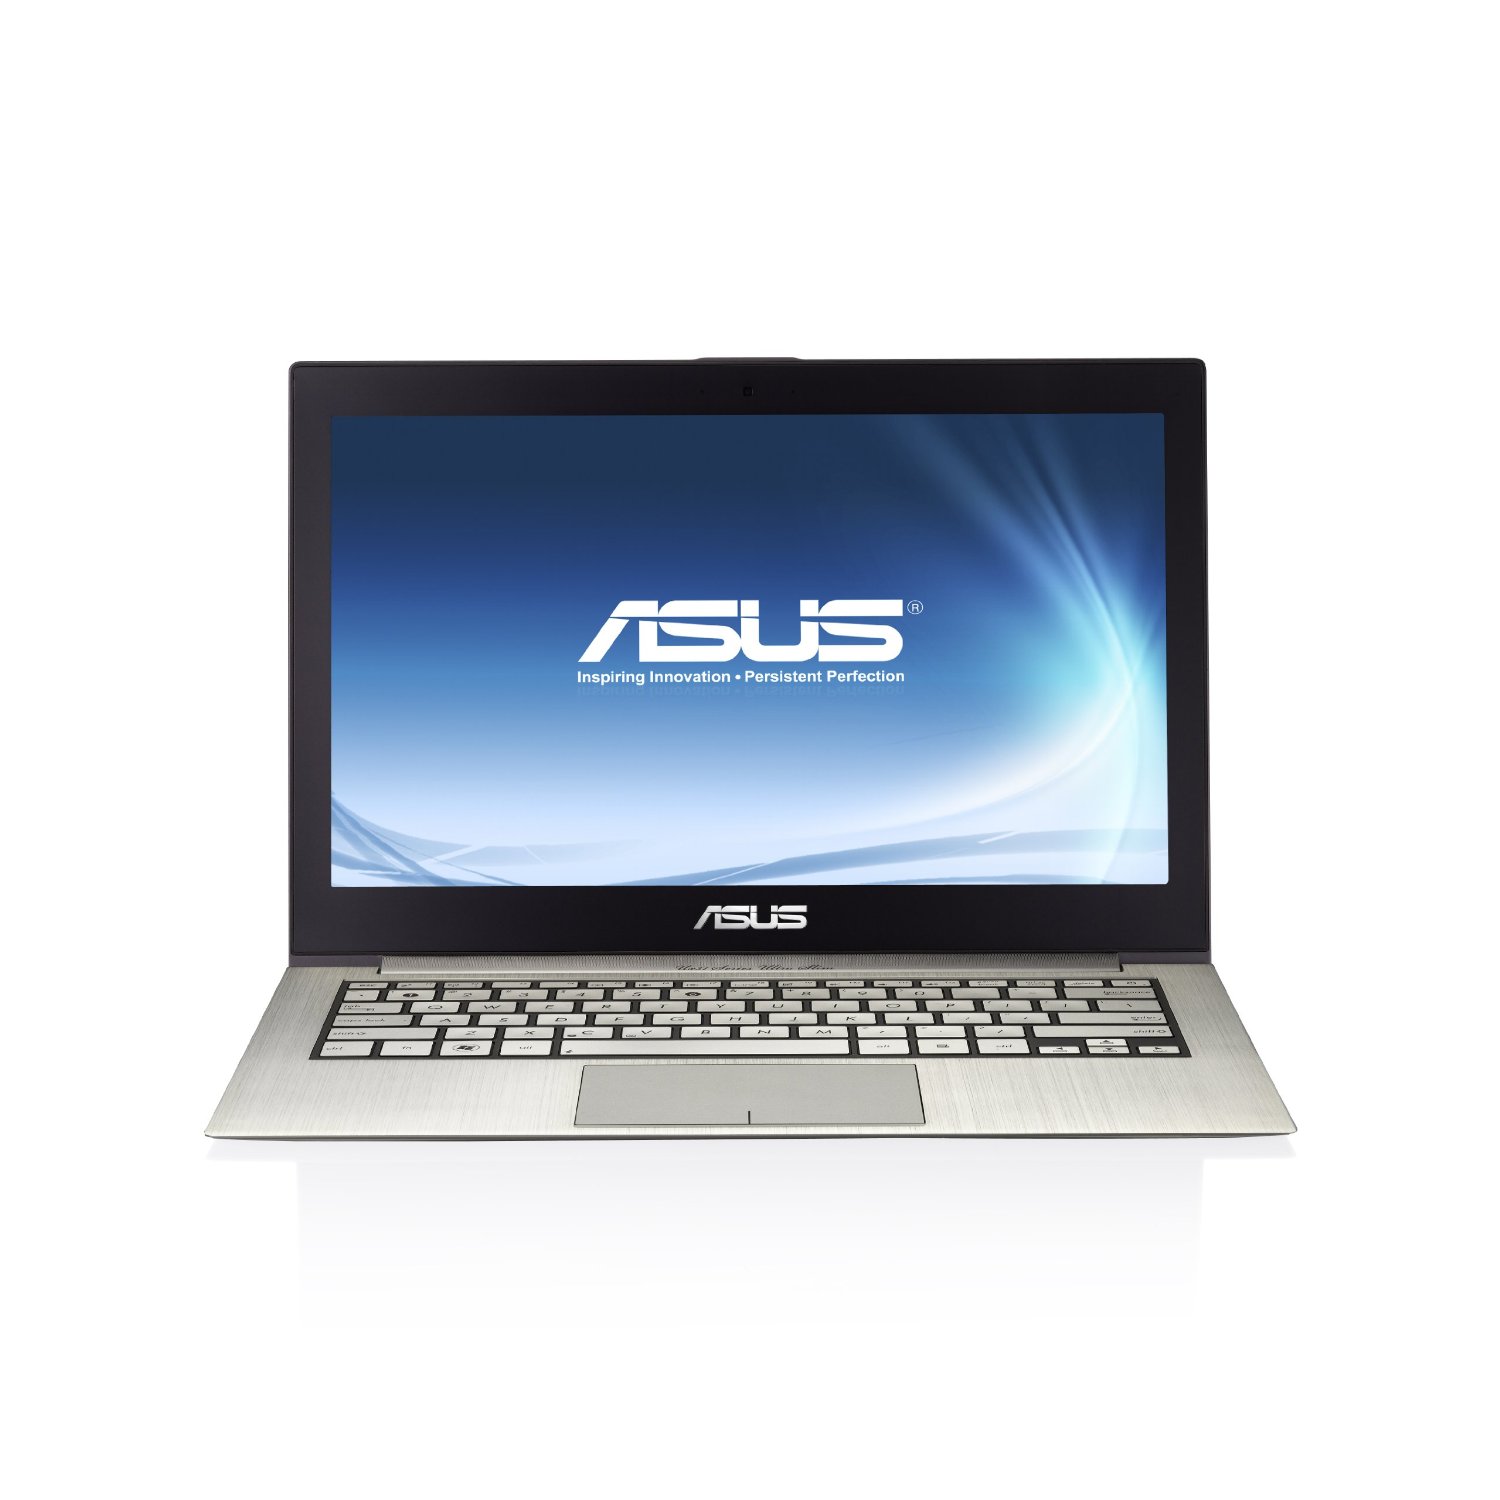 http://thetechjournal.com/wp-content/uploads/images/1111/1322100736-asus-zenbook-ux31edh72-133inch-thin-and-light-ultrabook-1.jpg